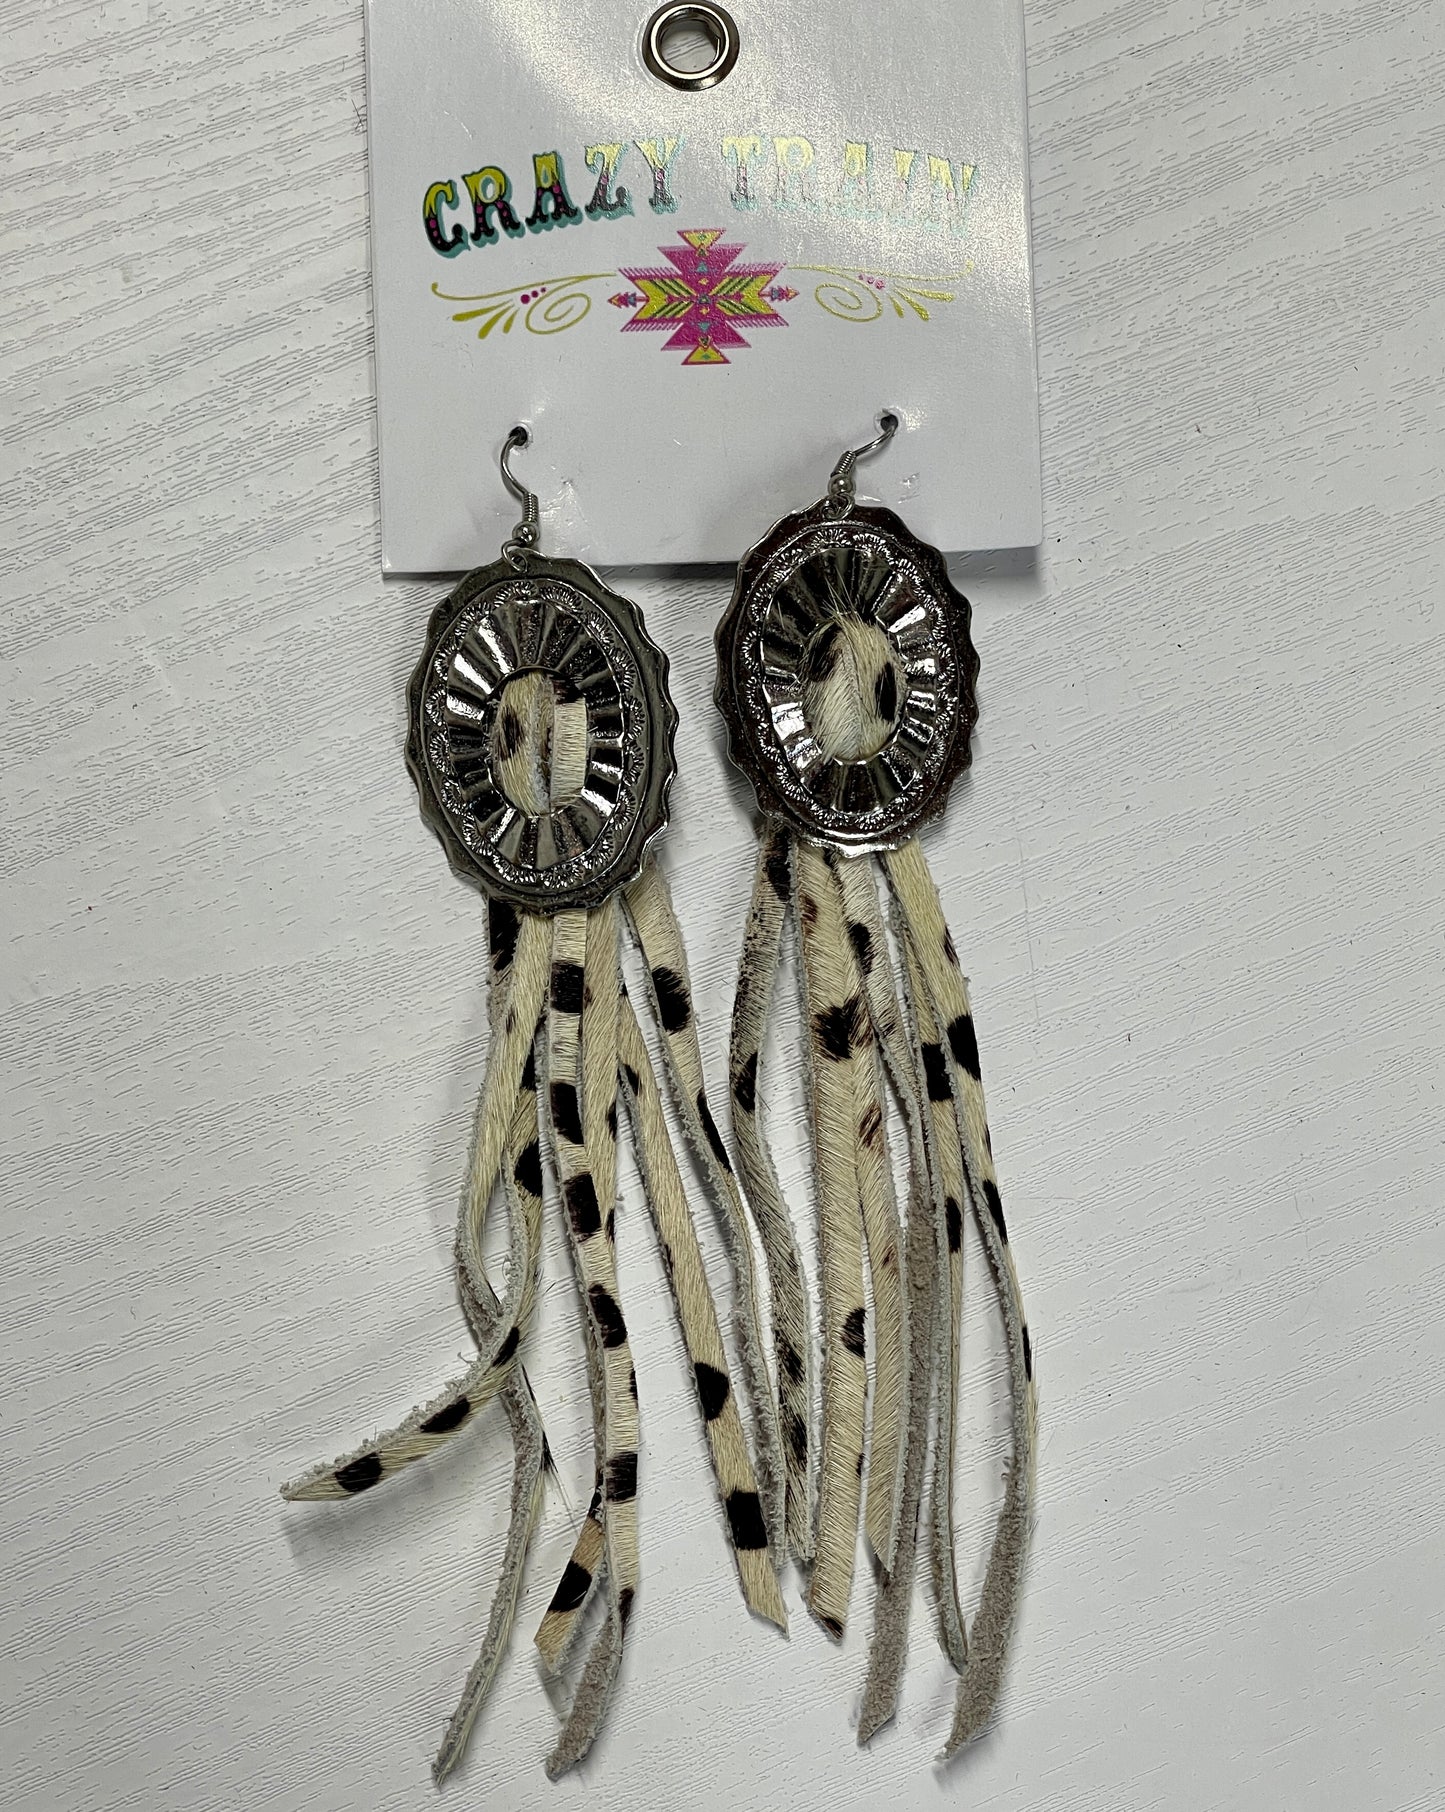 Crazy train earrings. Brown and cream cowhide printed leather tassels pulled through silver metal concho.